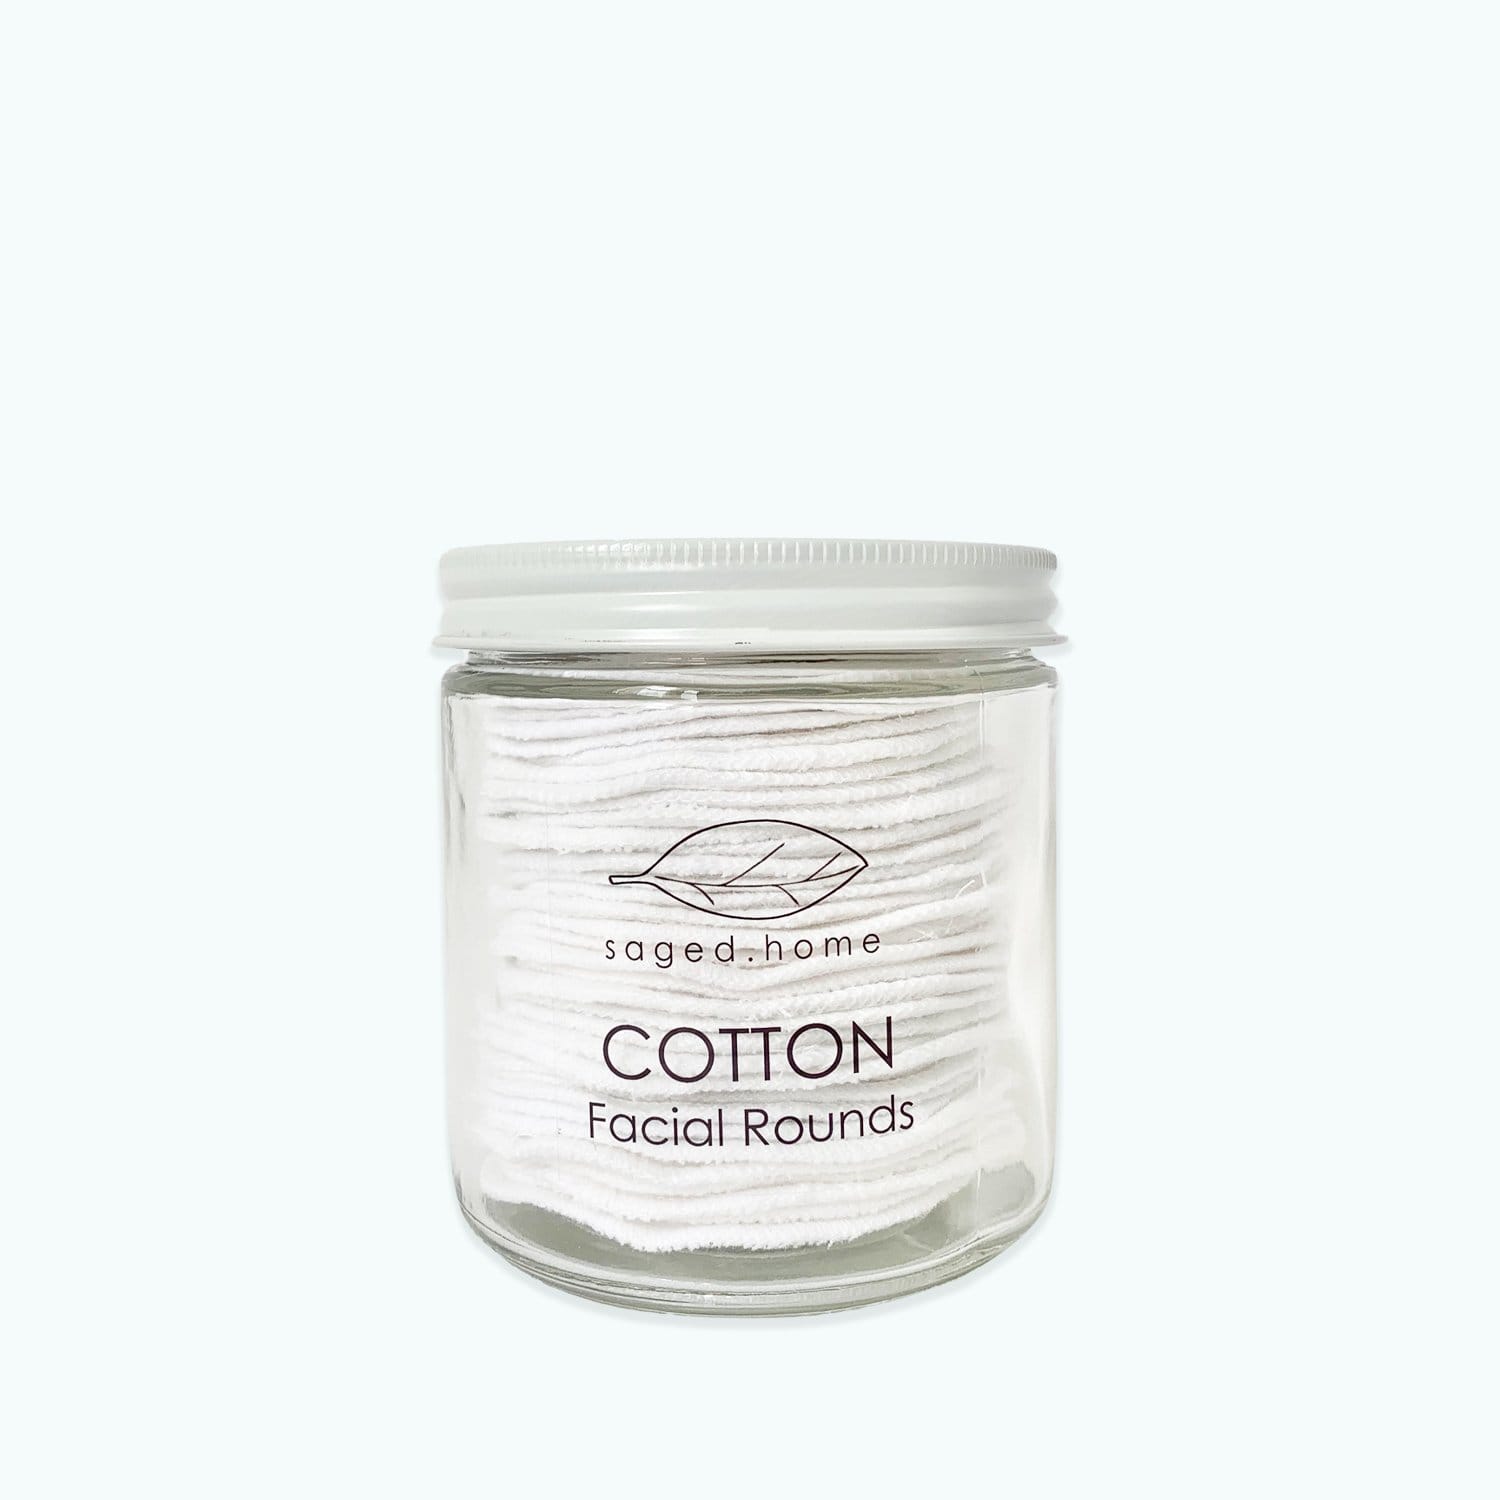 Saged Home Saged Home Cotton Facial Rounds - Reusable Facial Rounds, Washable & Reusable, 100% Organic Cotton Flannel, 30 Pack, In Jar